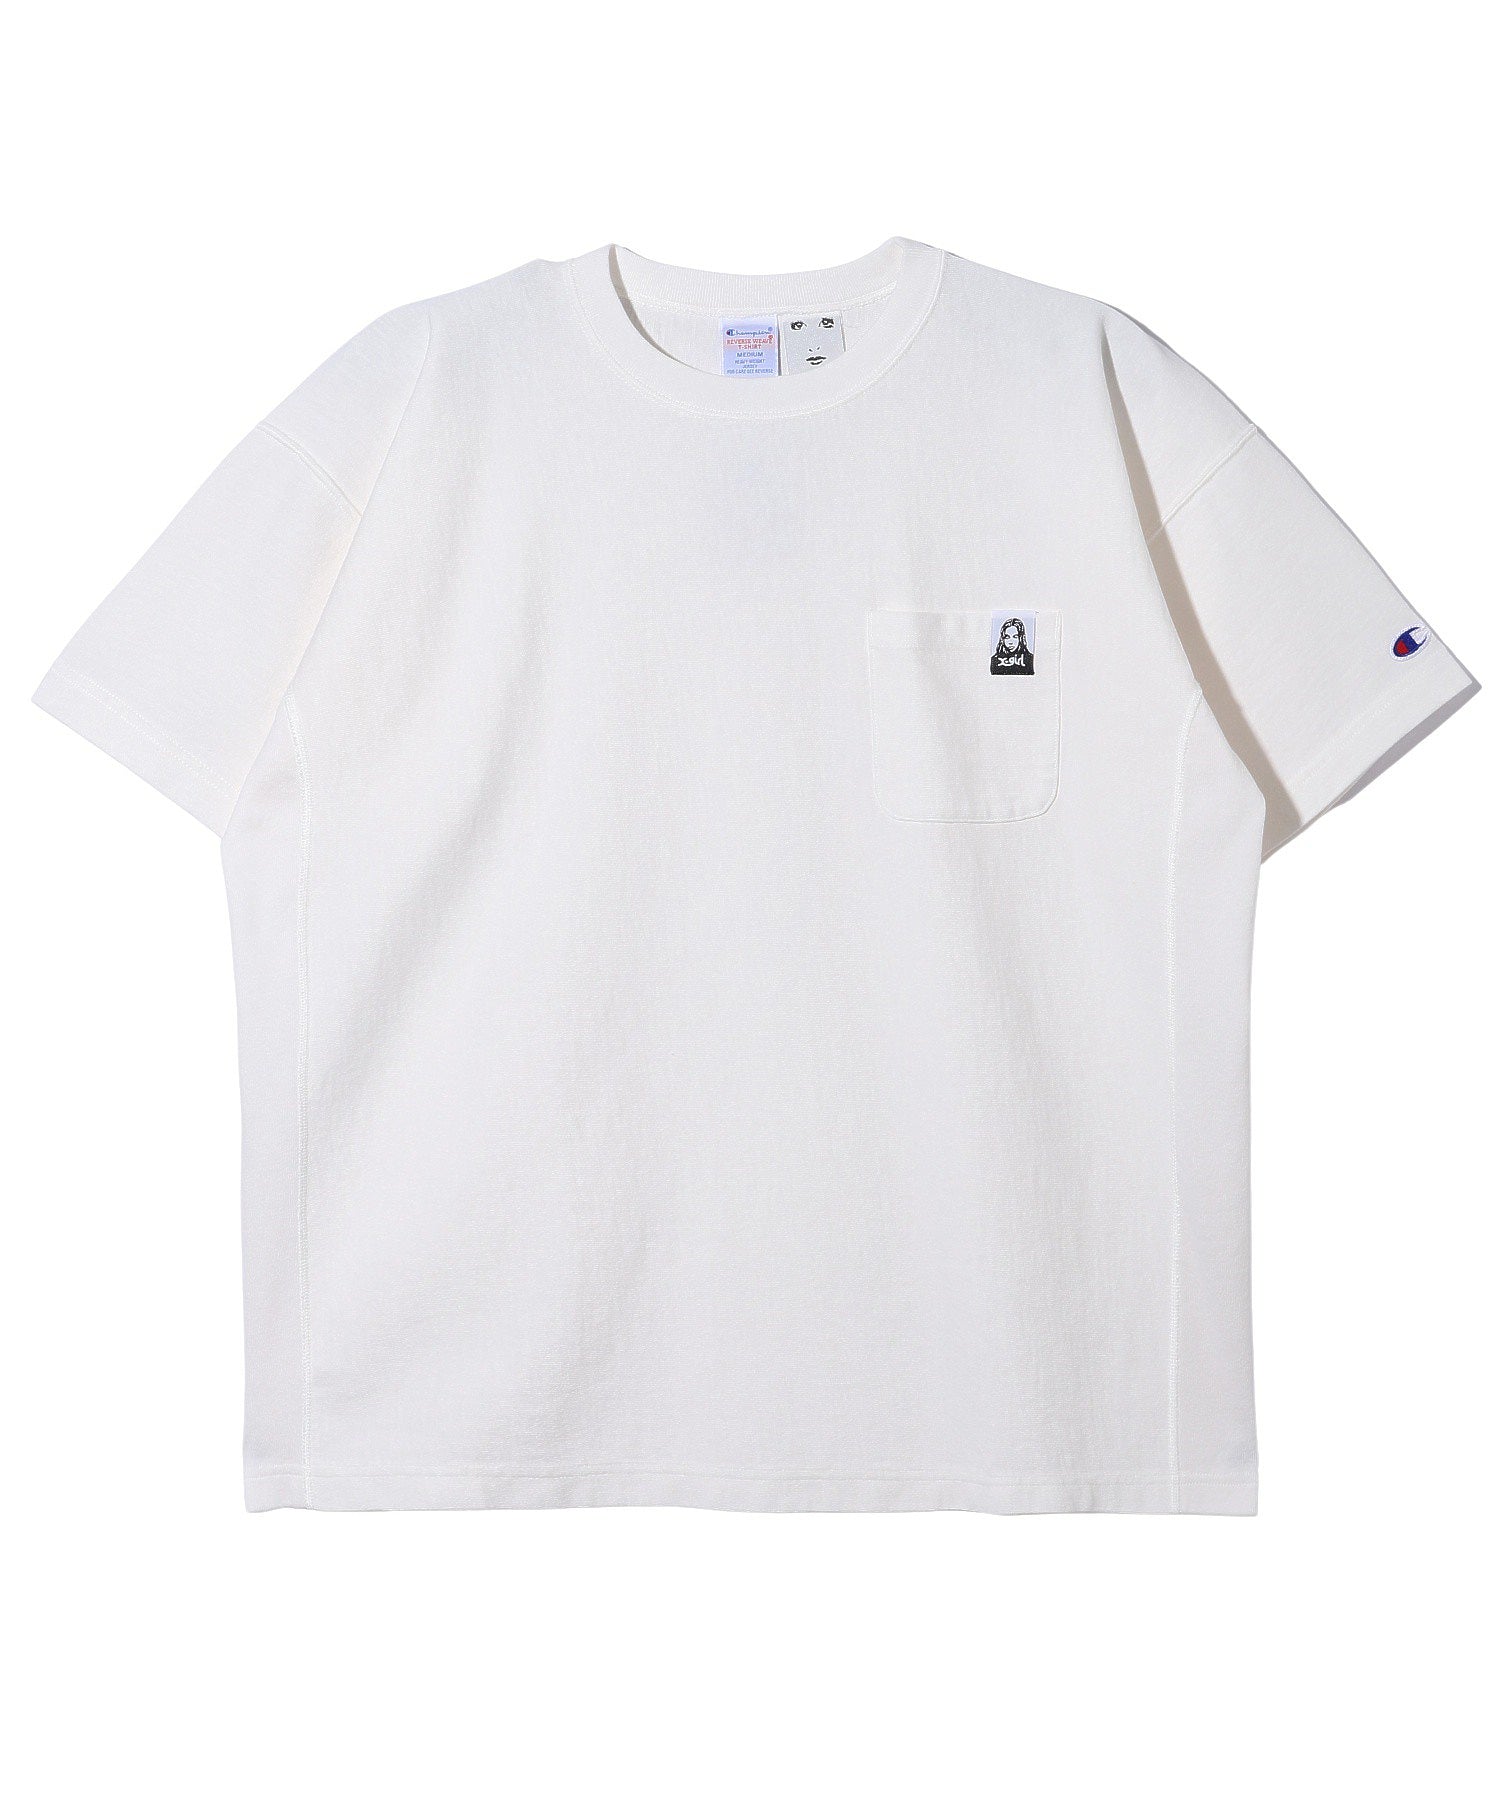 X-girl × Champion REVERSE WEAVE R PIGMENT DYED POCKET S/S TEE